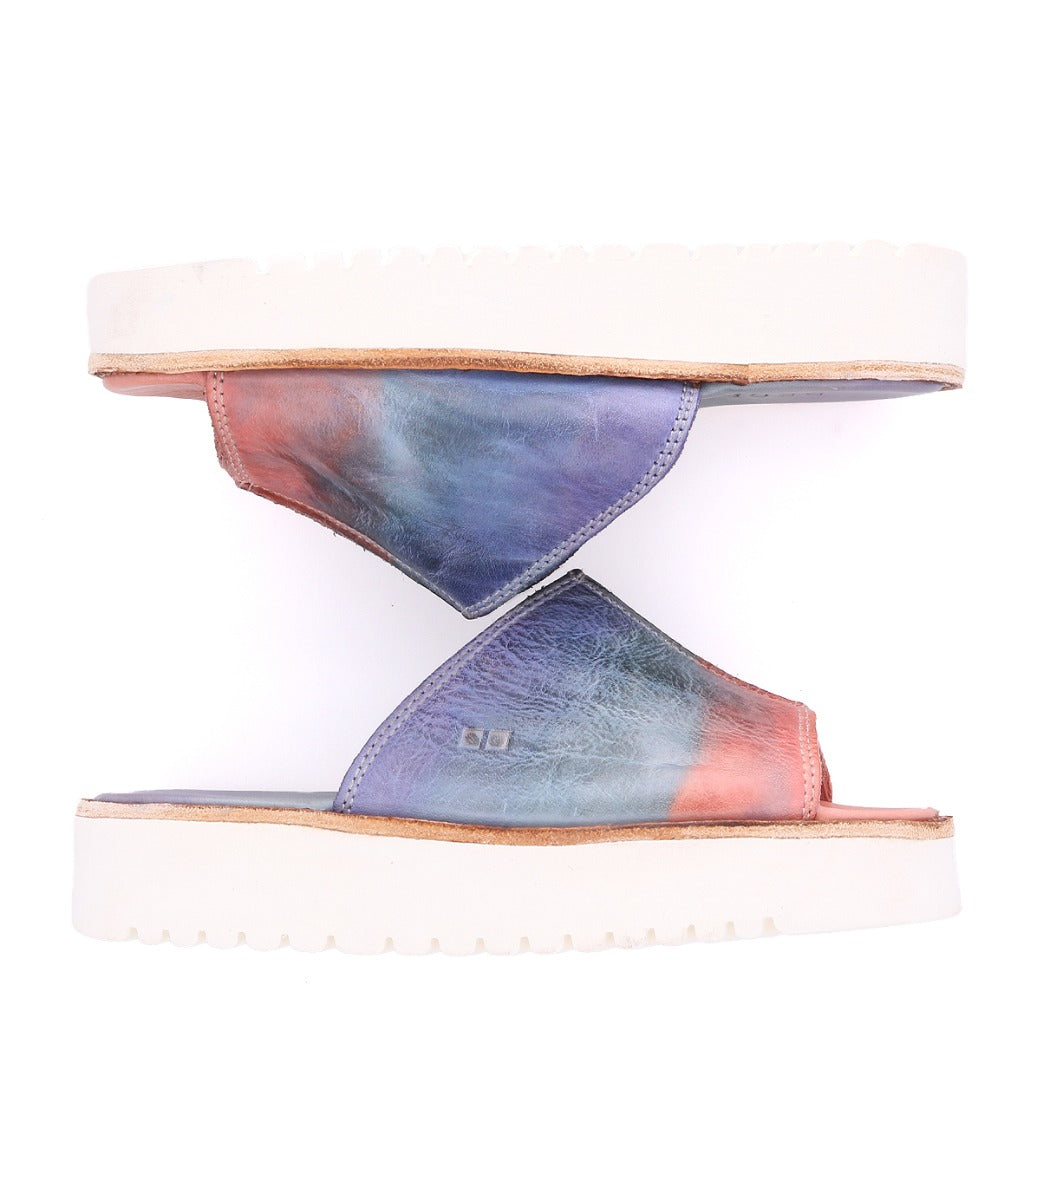 A pair of Fairlee II women's sandals with multi - colored dyes by Bed Stu.